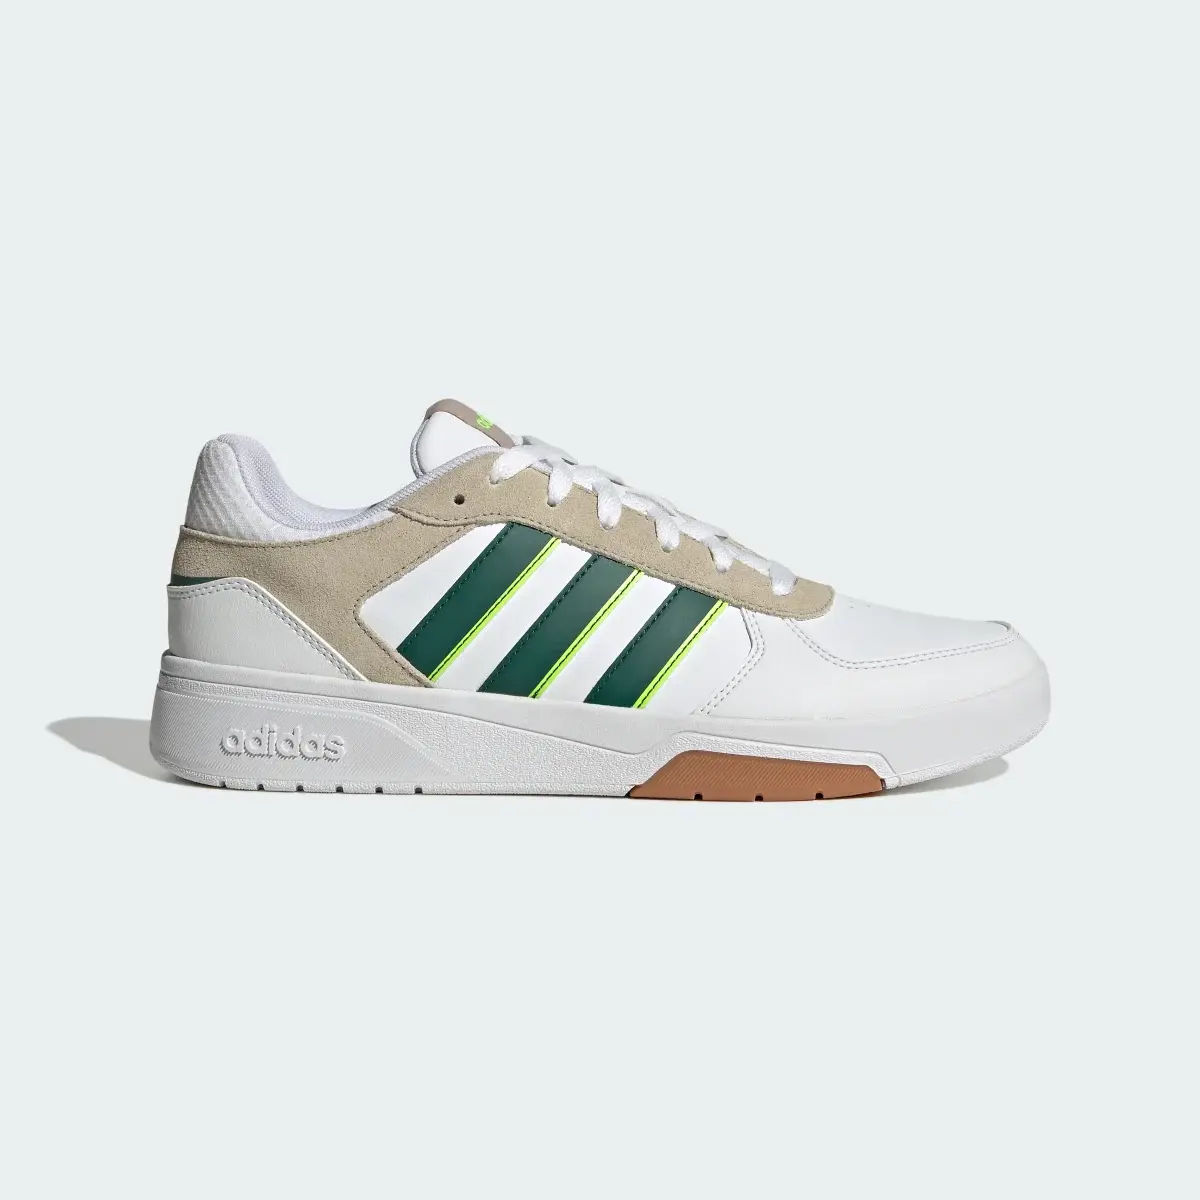 Adidas Courtbeat Shoes. 2